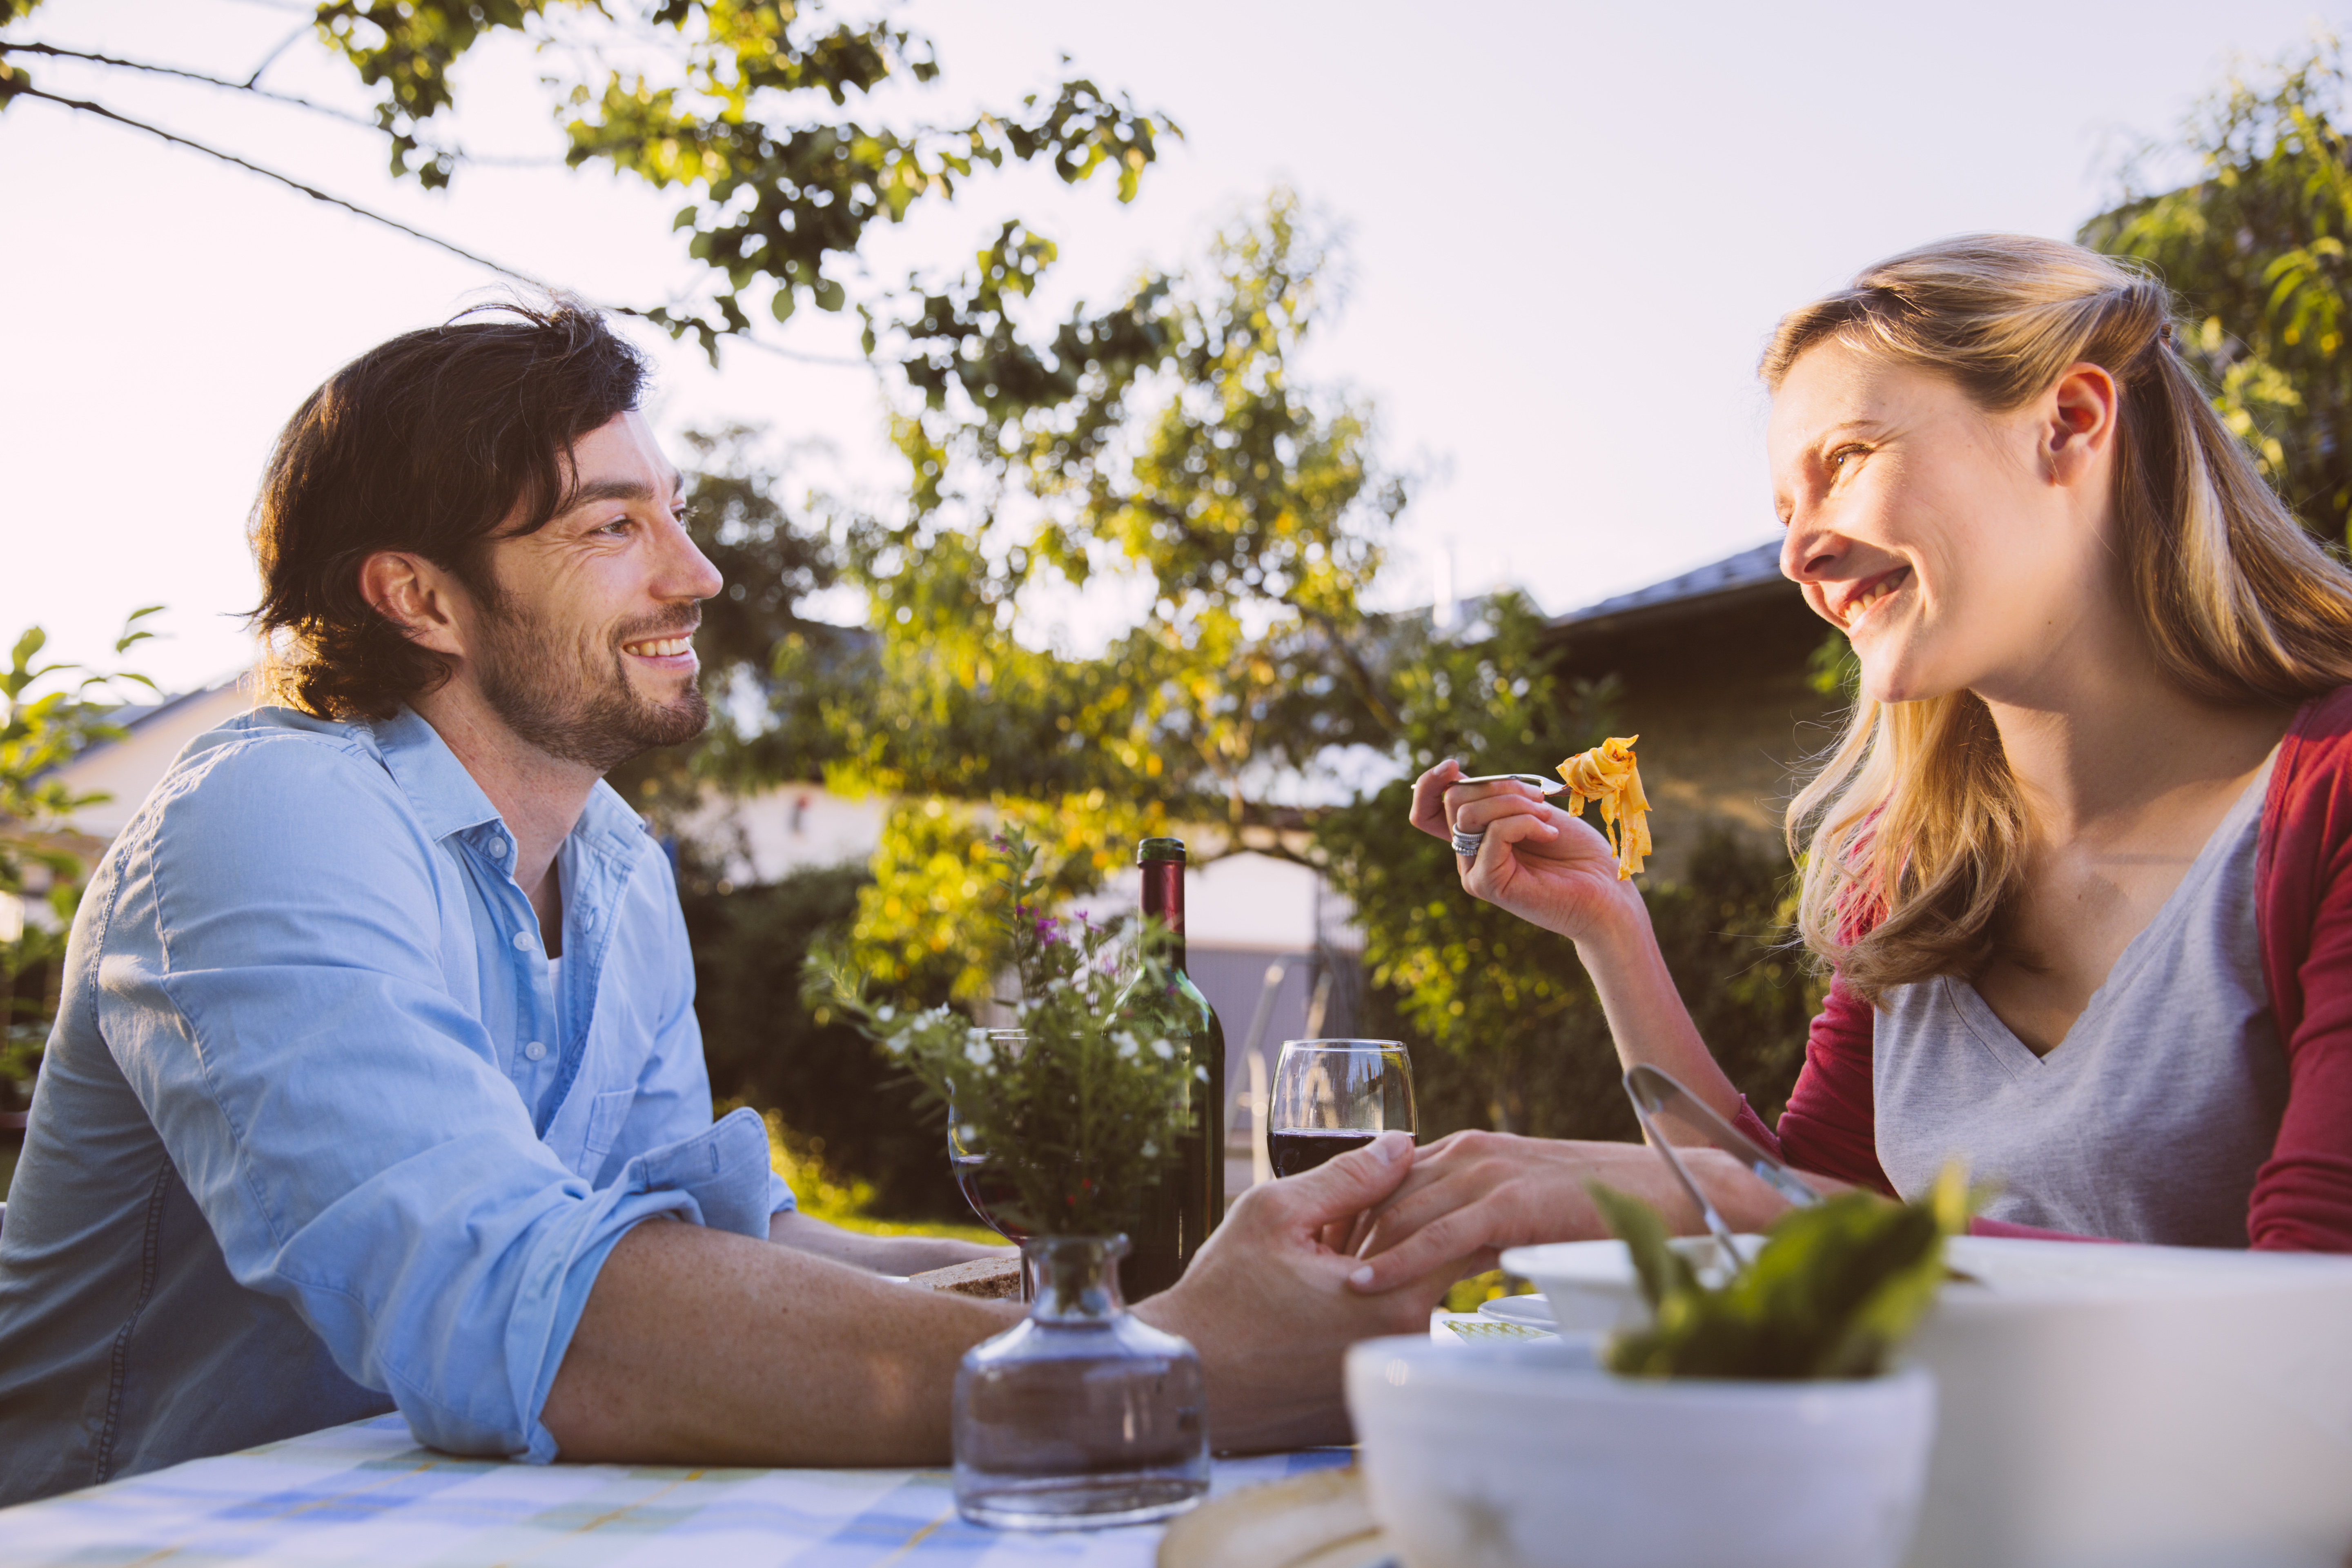 Five cash-saving tips to give your garden a romantic glow-up for a date night